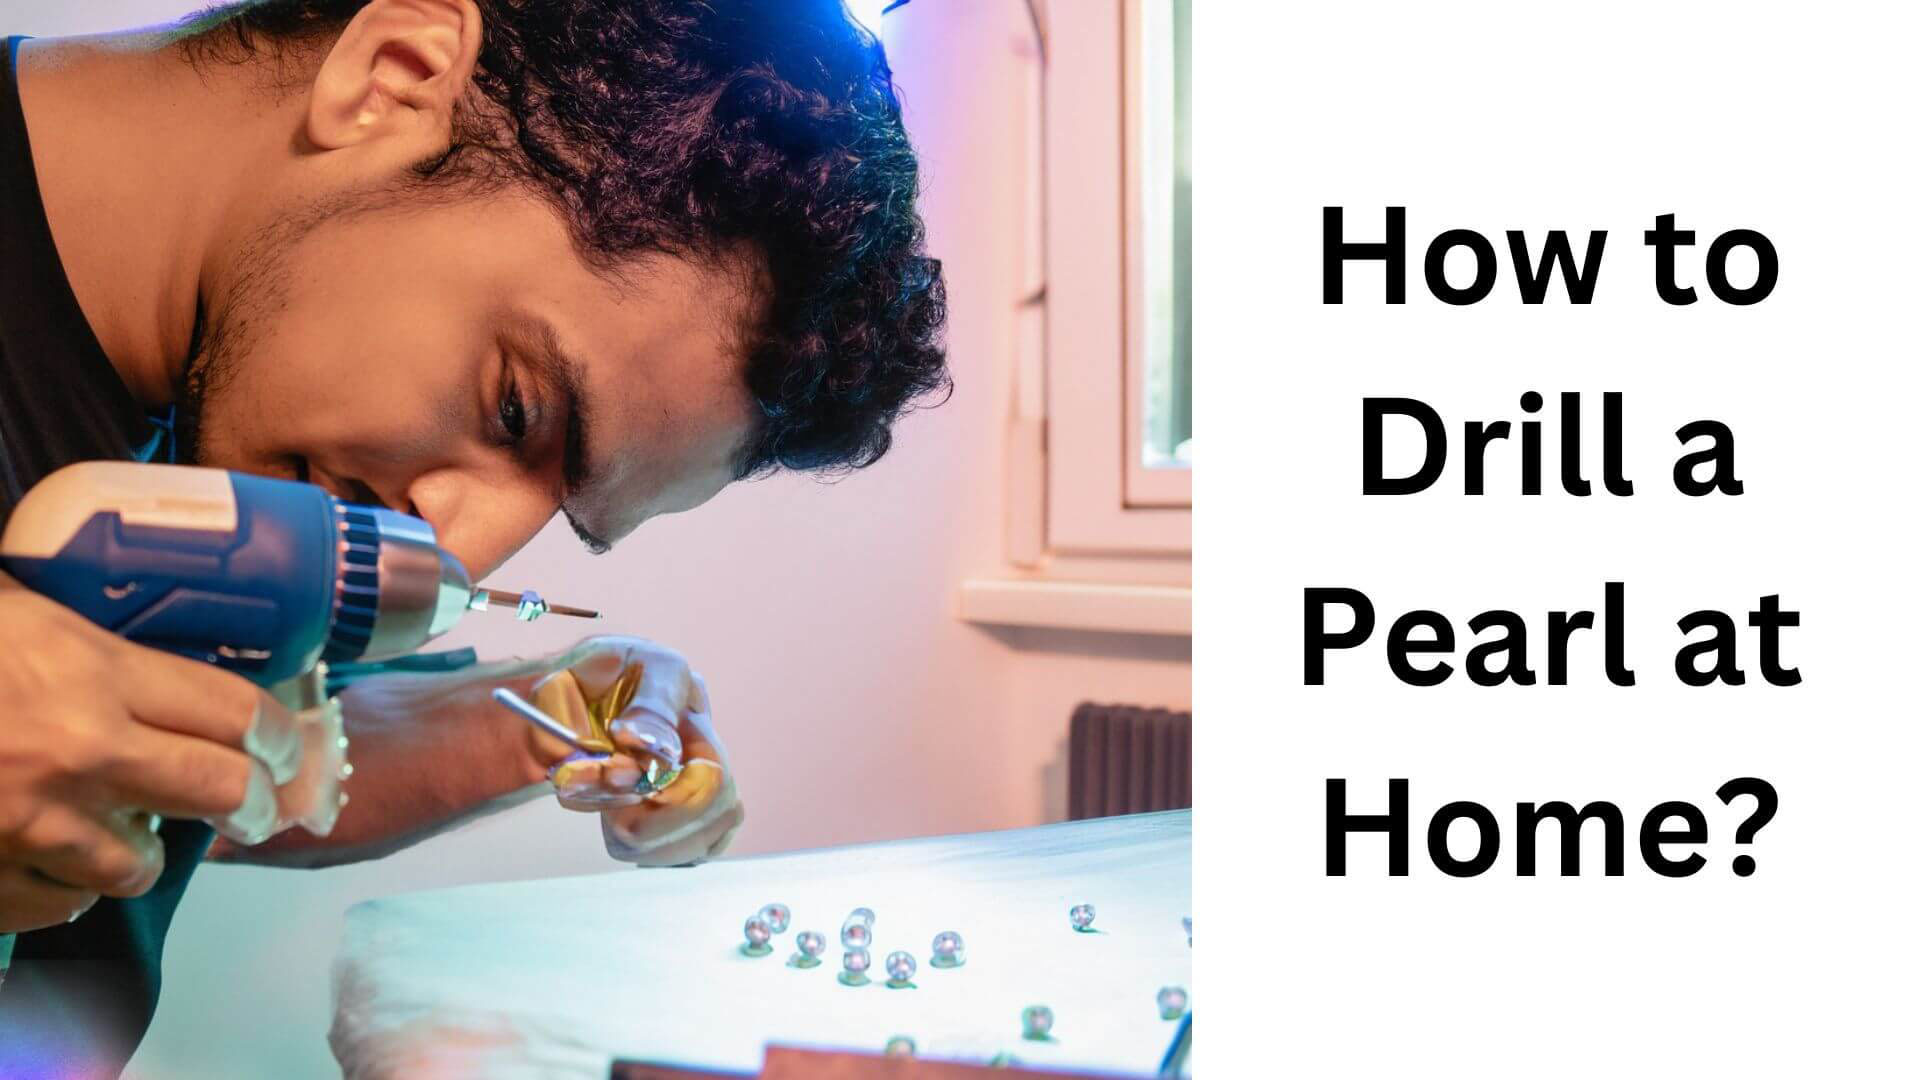 How to Drill a Pearl at Home?